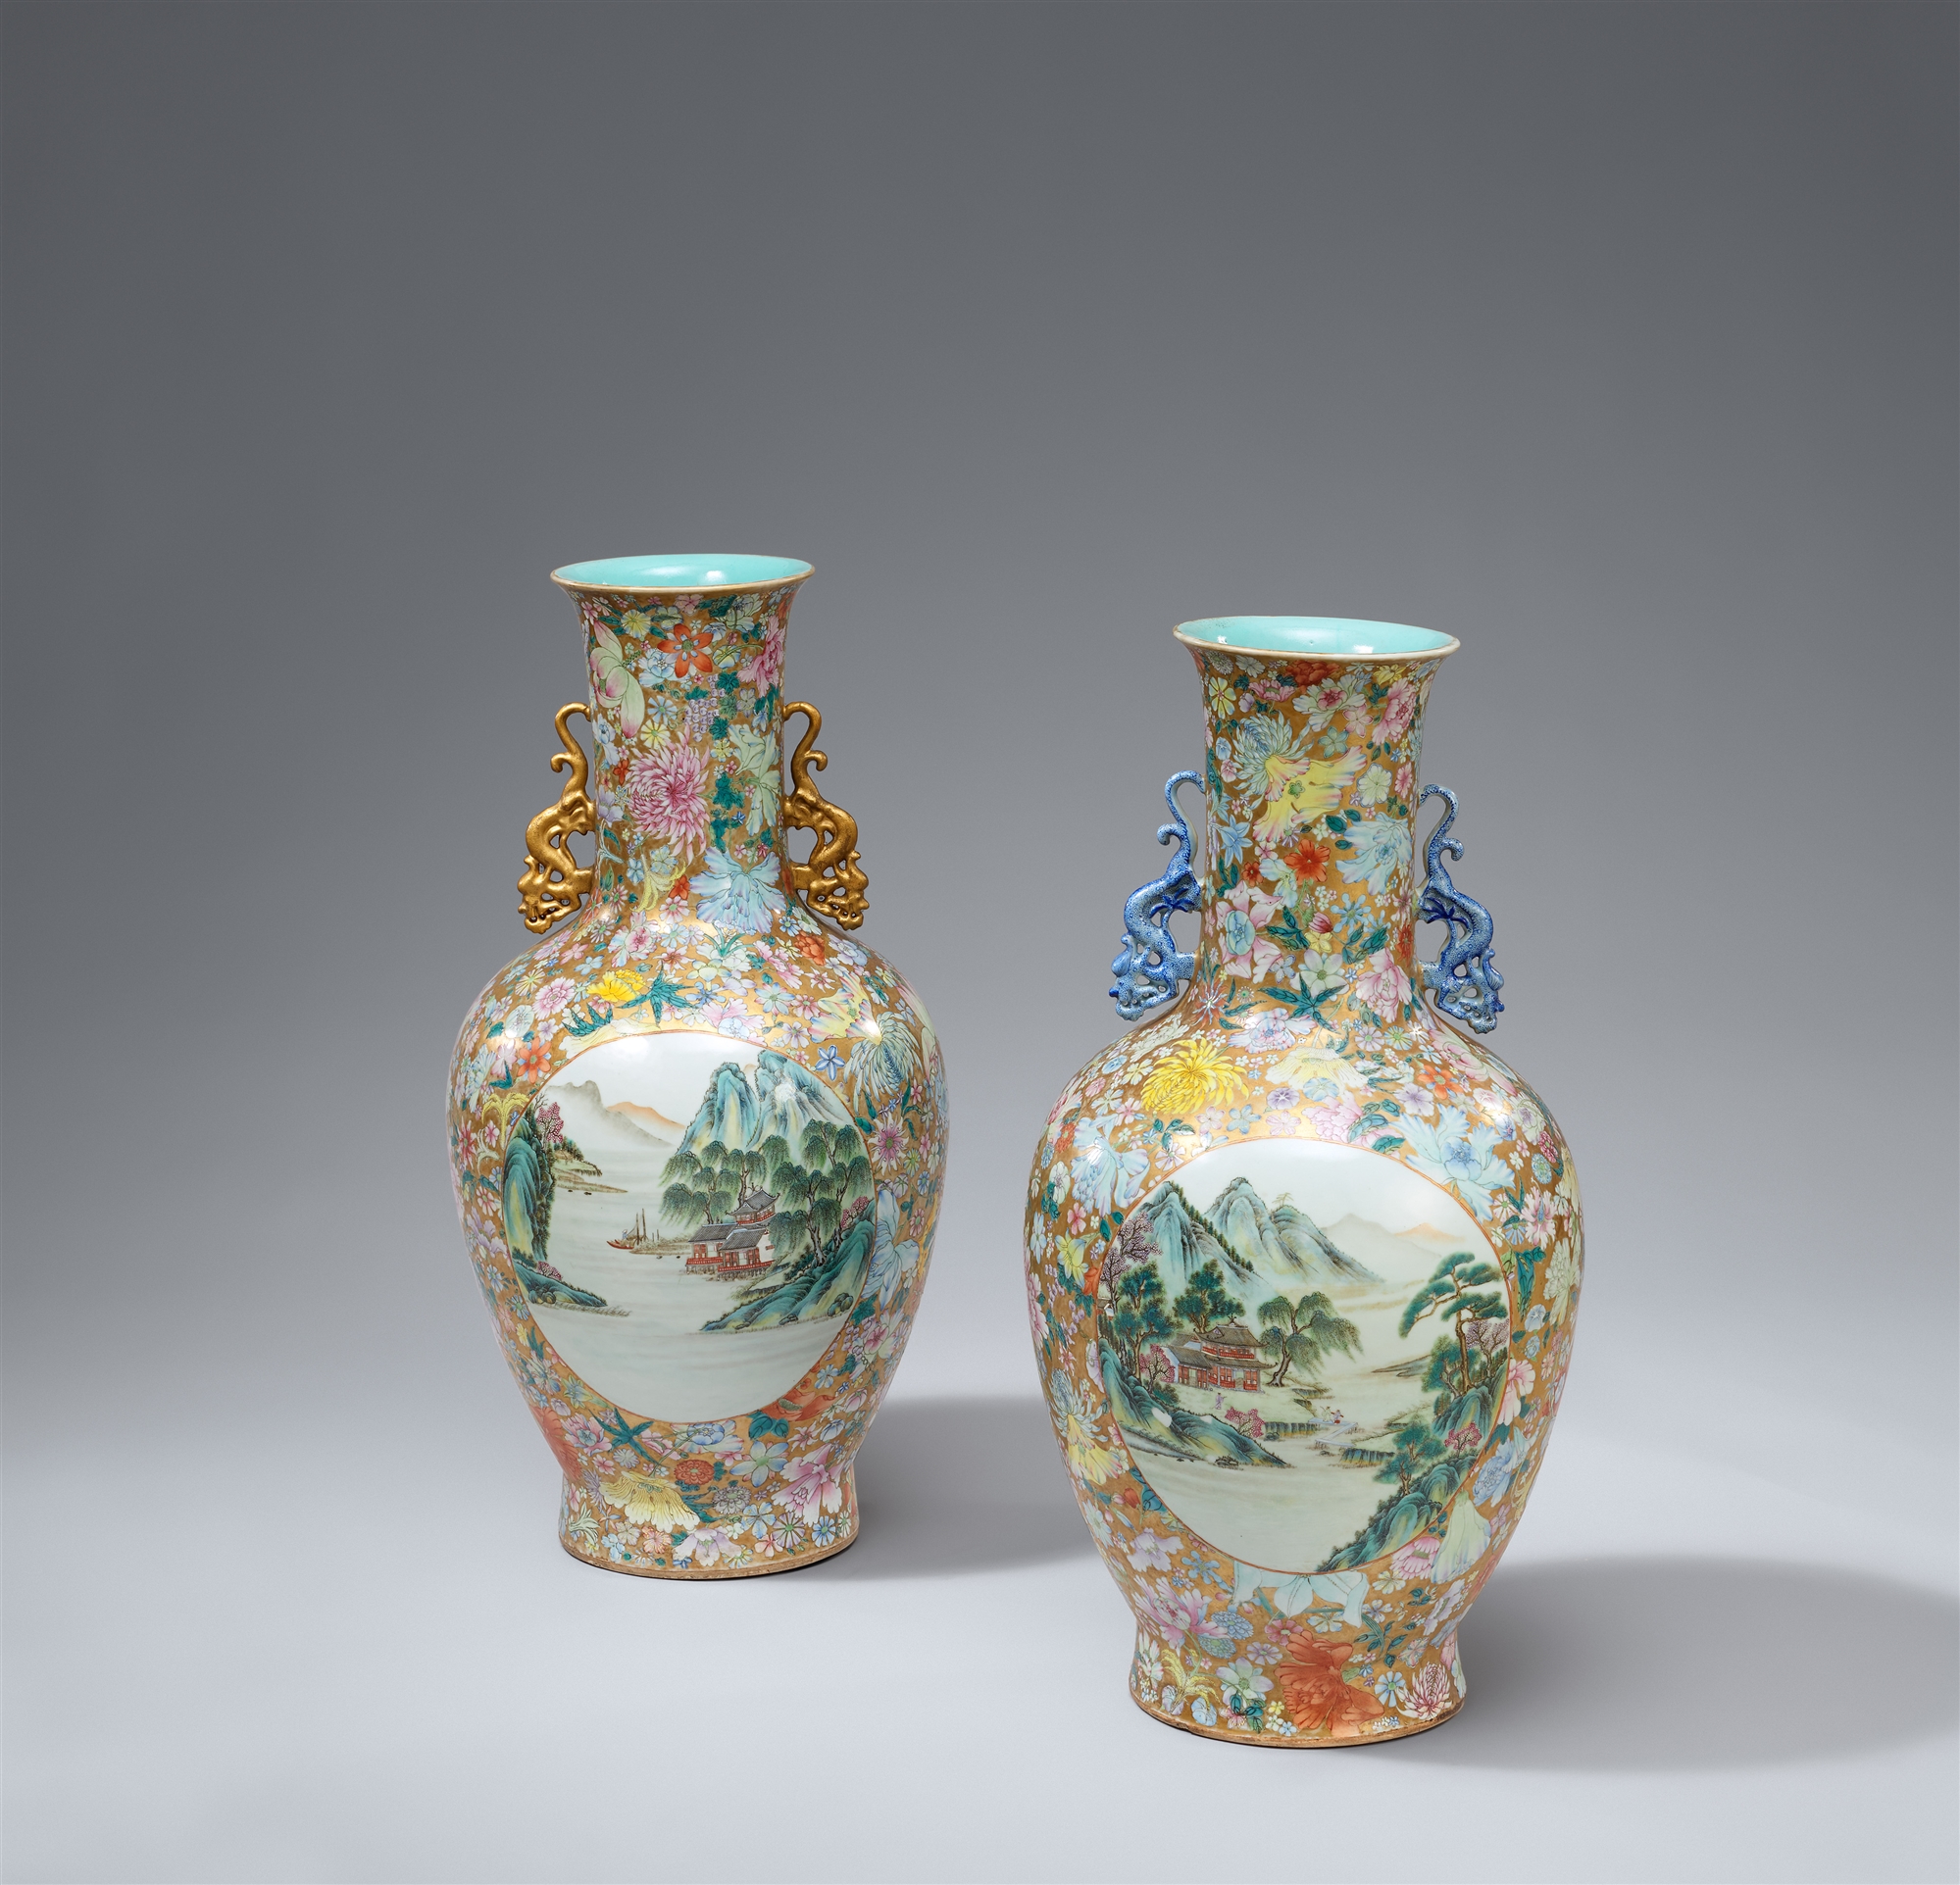 Two large mille-fleurs baluster vases. 20th century